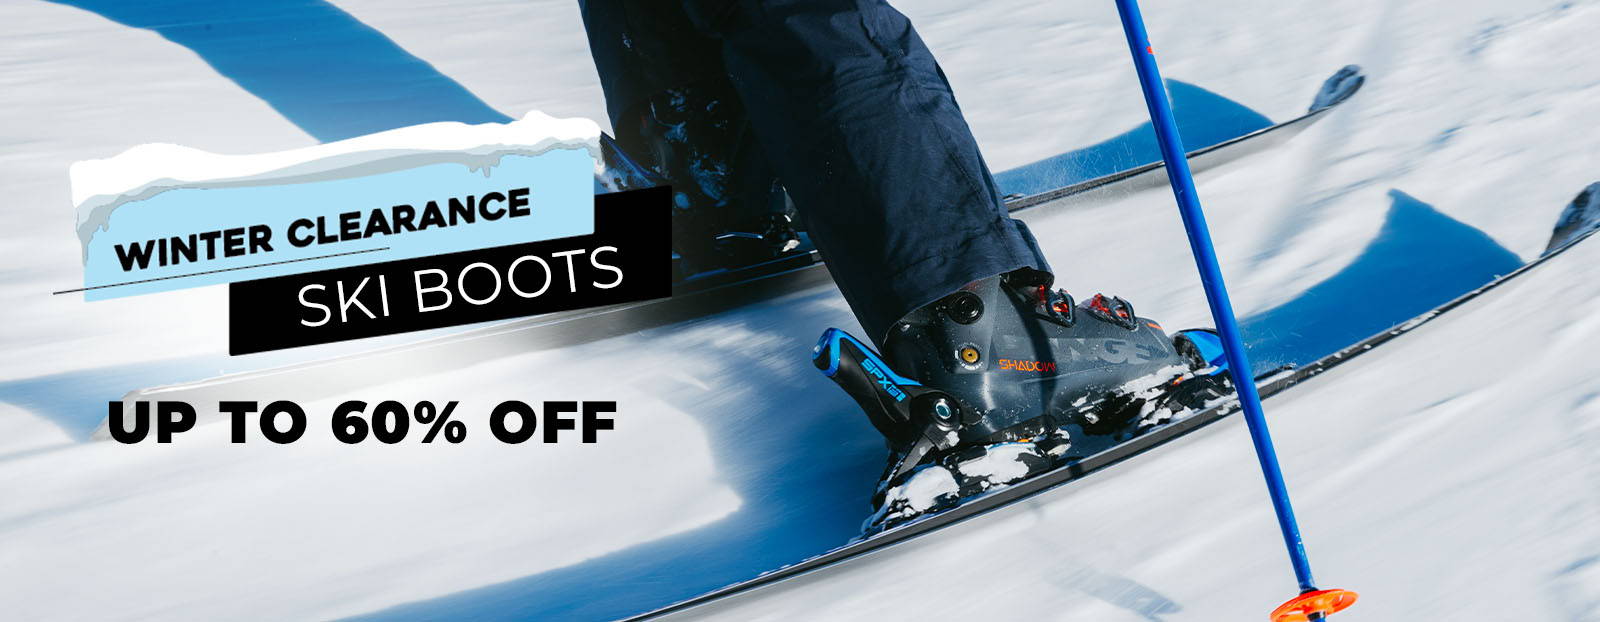 winter clearance ski boots up to 60% off